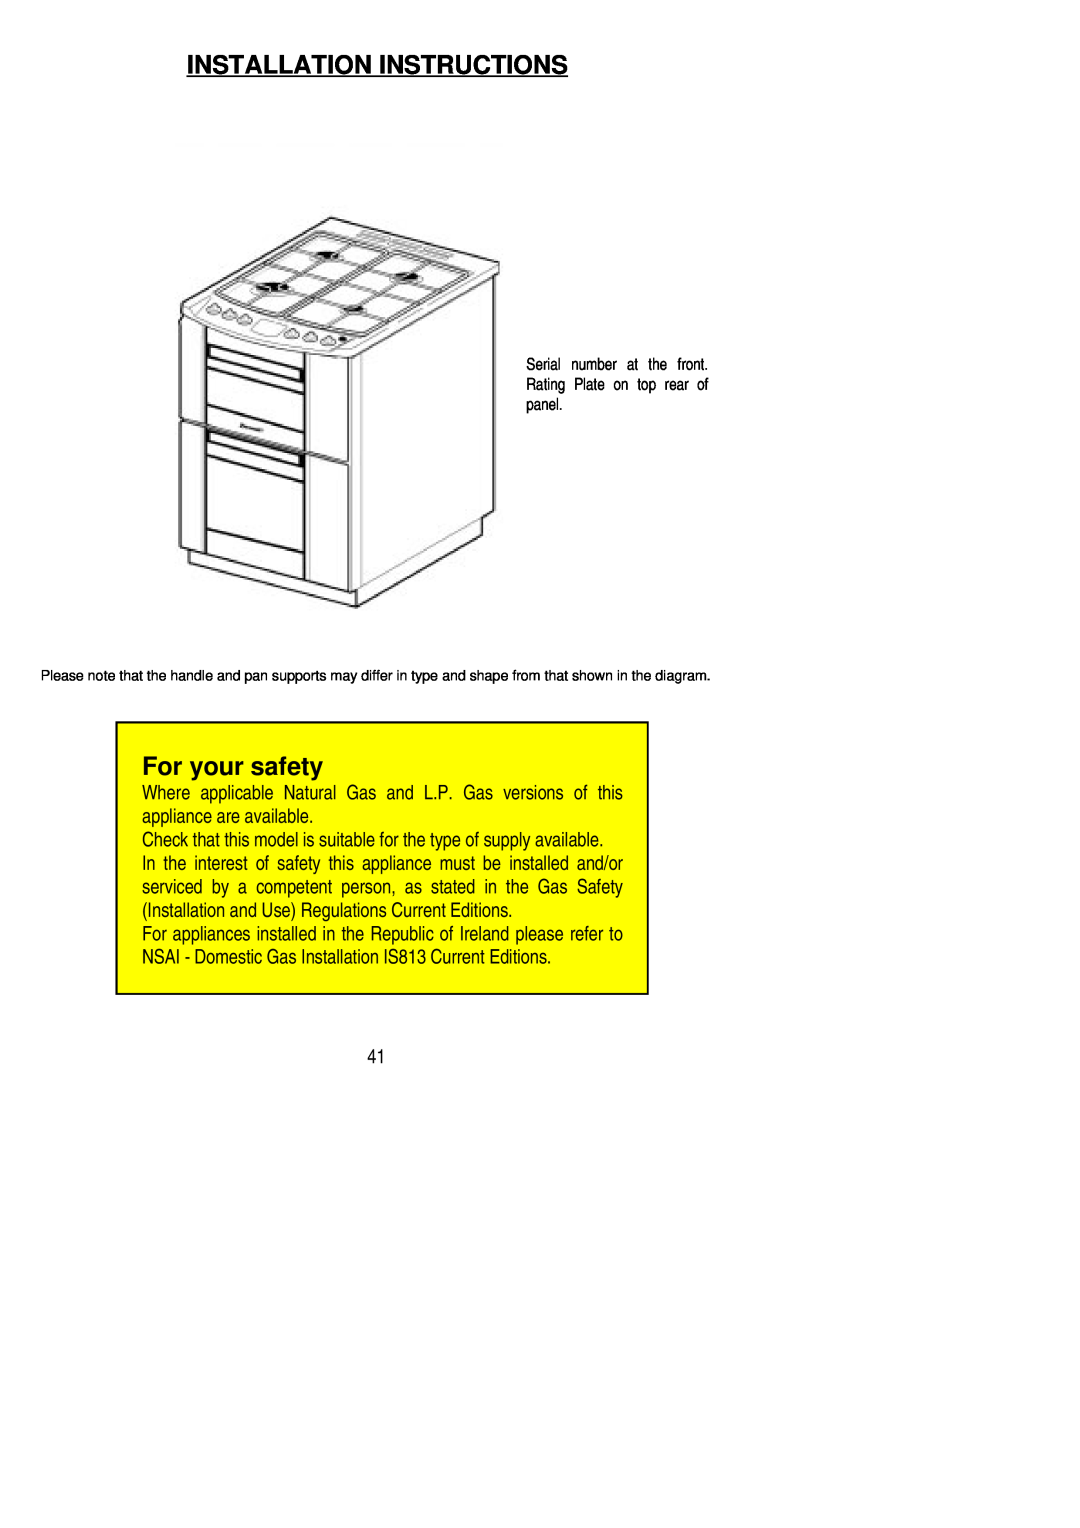 Zanussi ZCG 8021 Installation Instructions, For your safety, Serial number at the front. Rating Plate on top rear of panel 